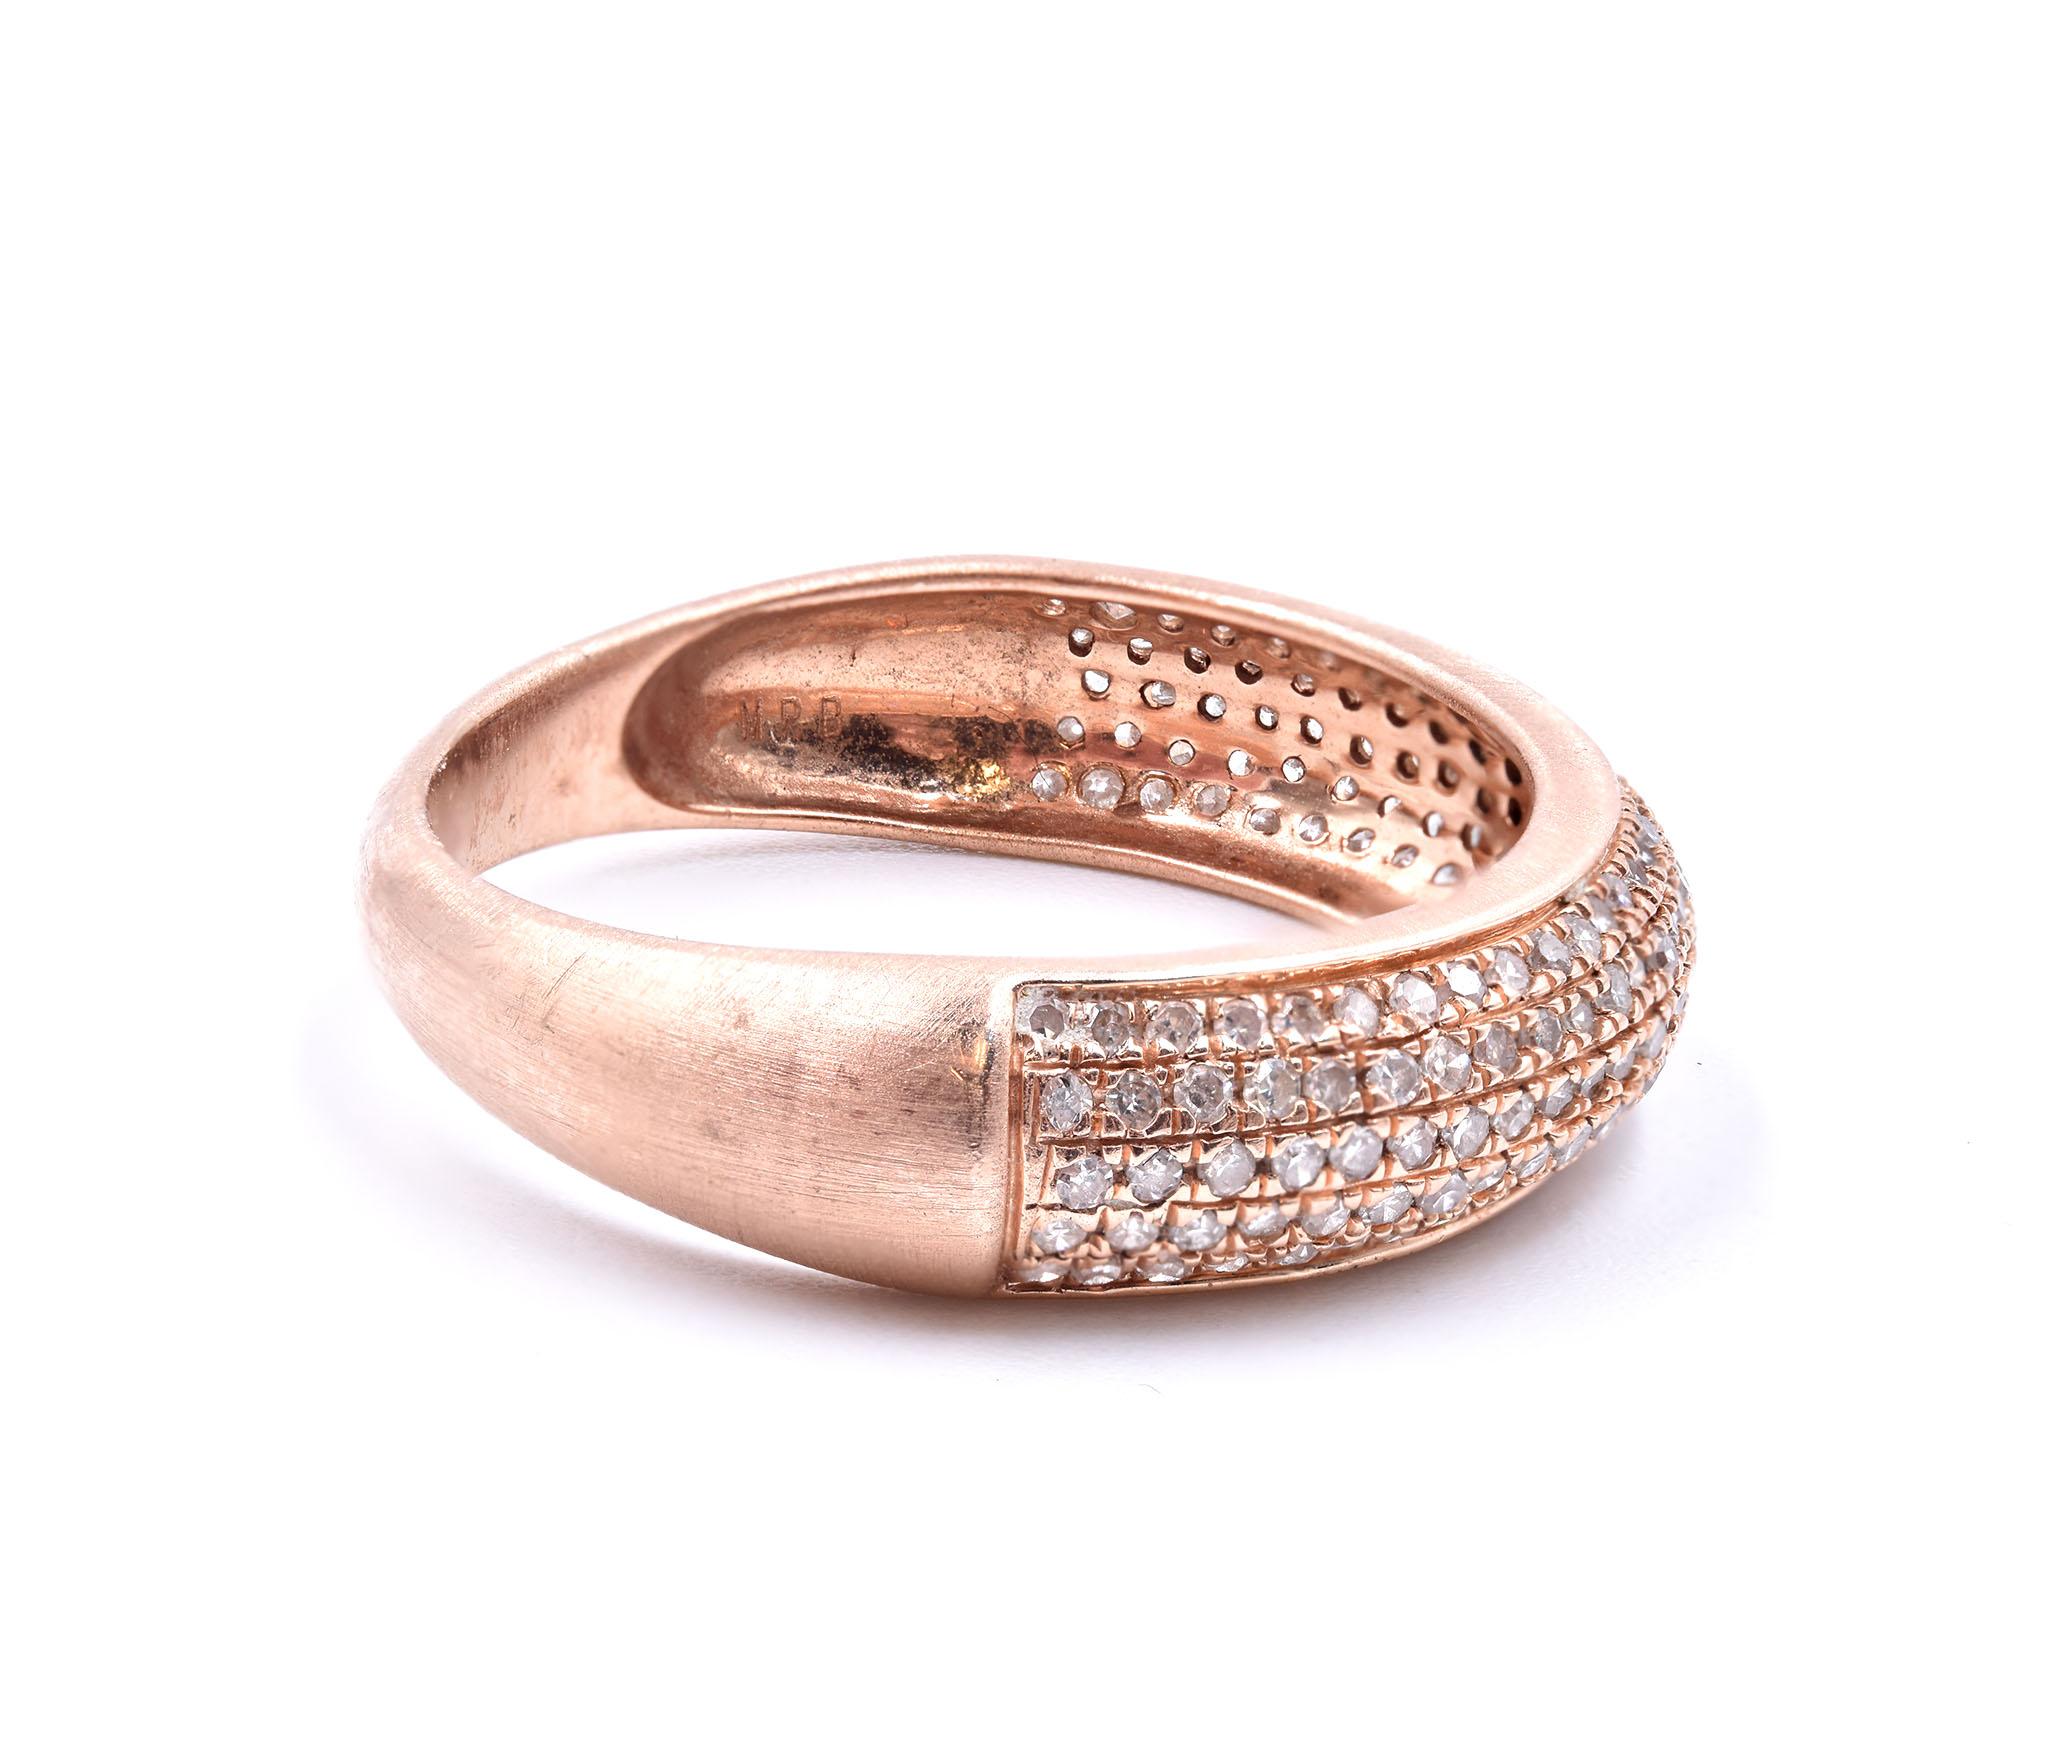 Designer: Custom
Material: 14K rose gold
Diamonds: 160 round cut = .40cttw 
Color: H
Clarity: SI1-2
Size: 6.5
Dimensions: ring measures 5.34mm in width
Weight: 2.8 grams
